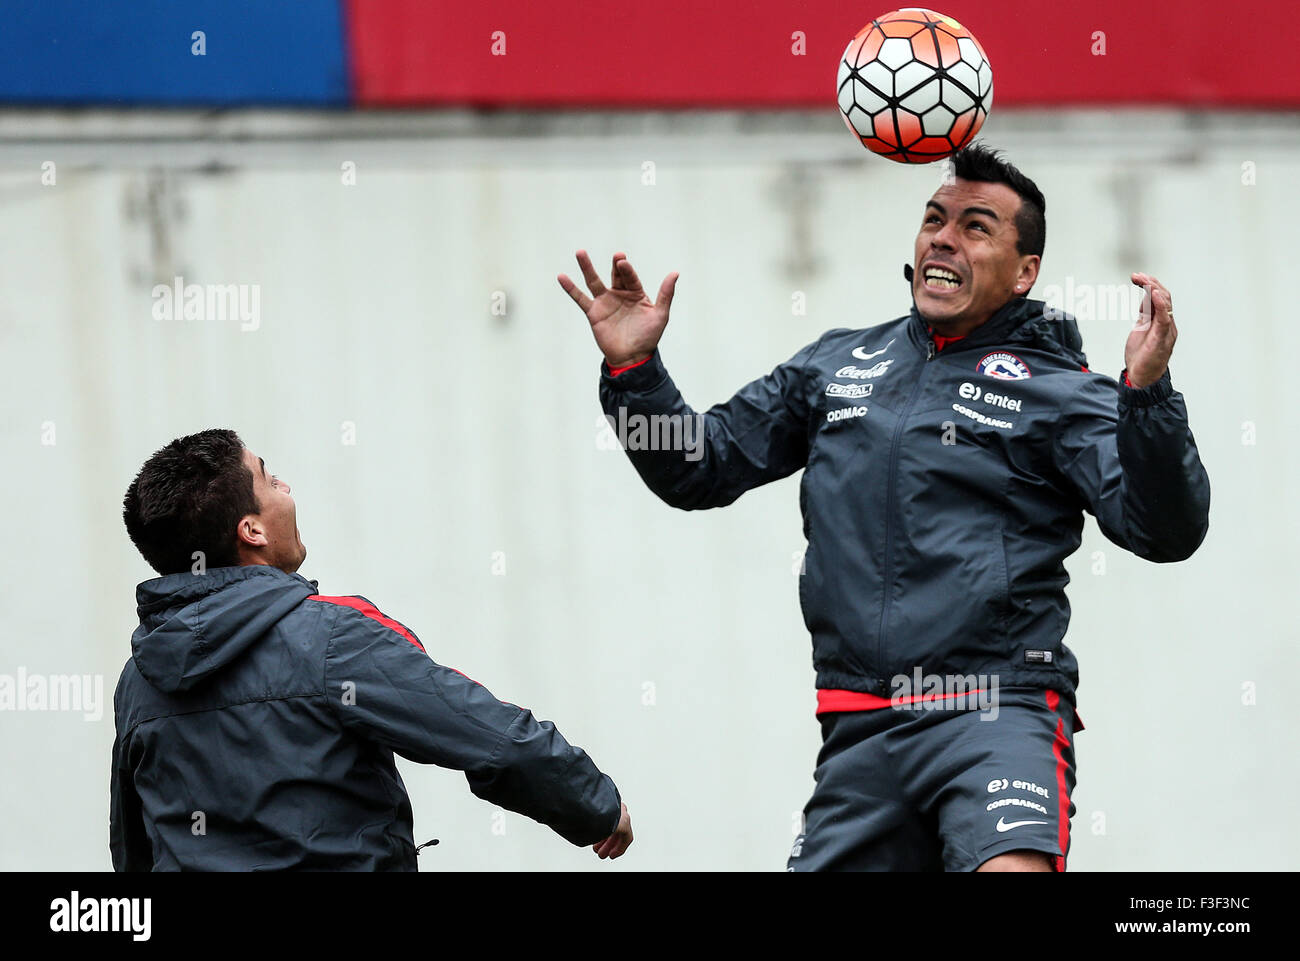 Santiago, Chile. 6th Oct, 2015. Chile national soccer team player Esteban Paredes (R), takes part in a training session at Juan Pinto Duran Sports Complex, in Santiago city, capital of Chile, Oct. 6, 2015. Chile soccer team took part in a training session facing its qualifying match against Brazil heading to World Cup Russia 2018, which will be played on Oct. 8 at the Santiago National Stadium. © ANFP/Xinhua/Alamy Live News Stock Photo